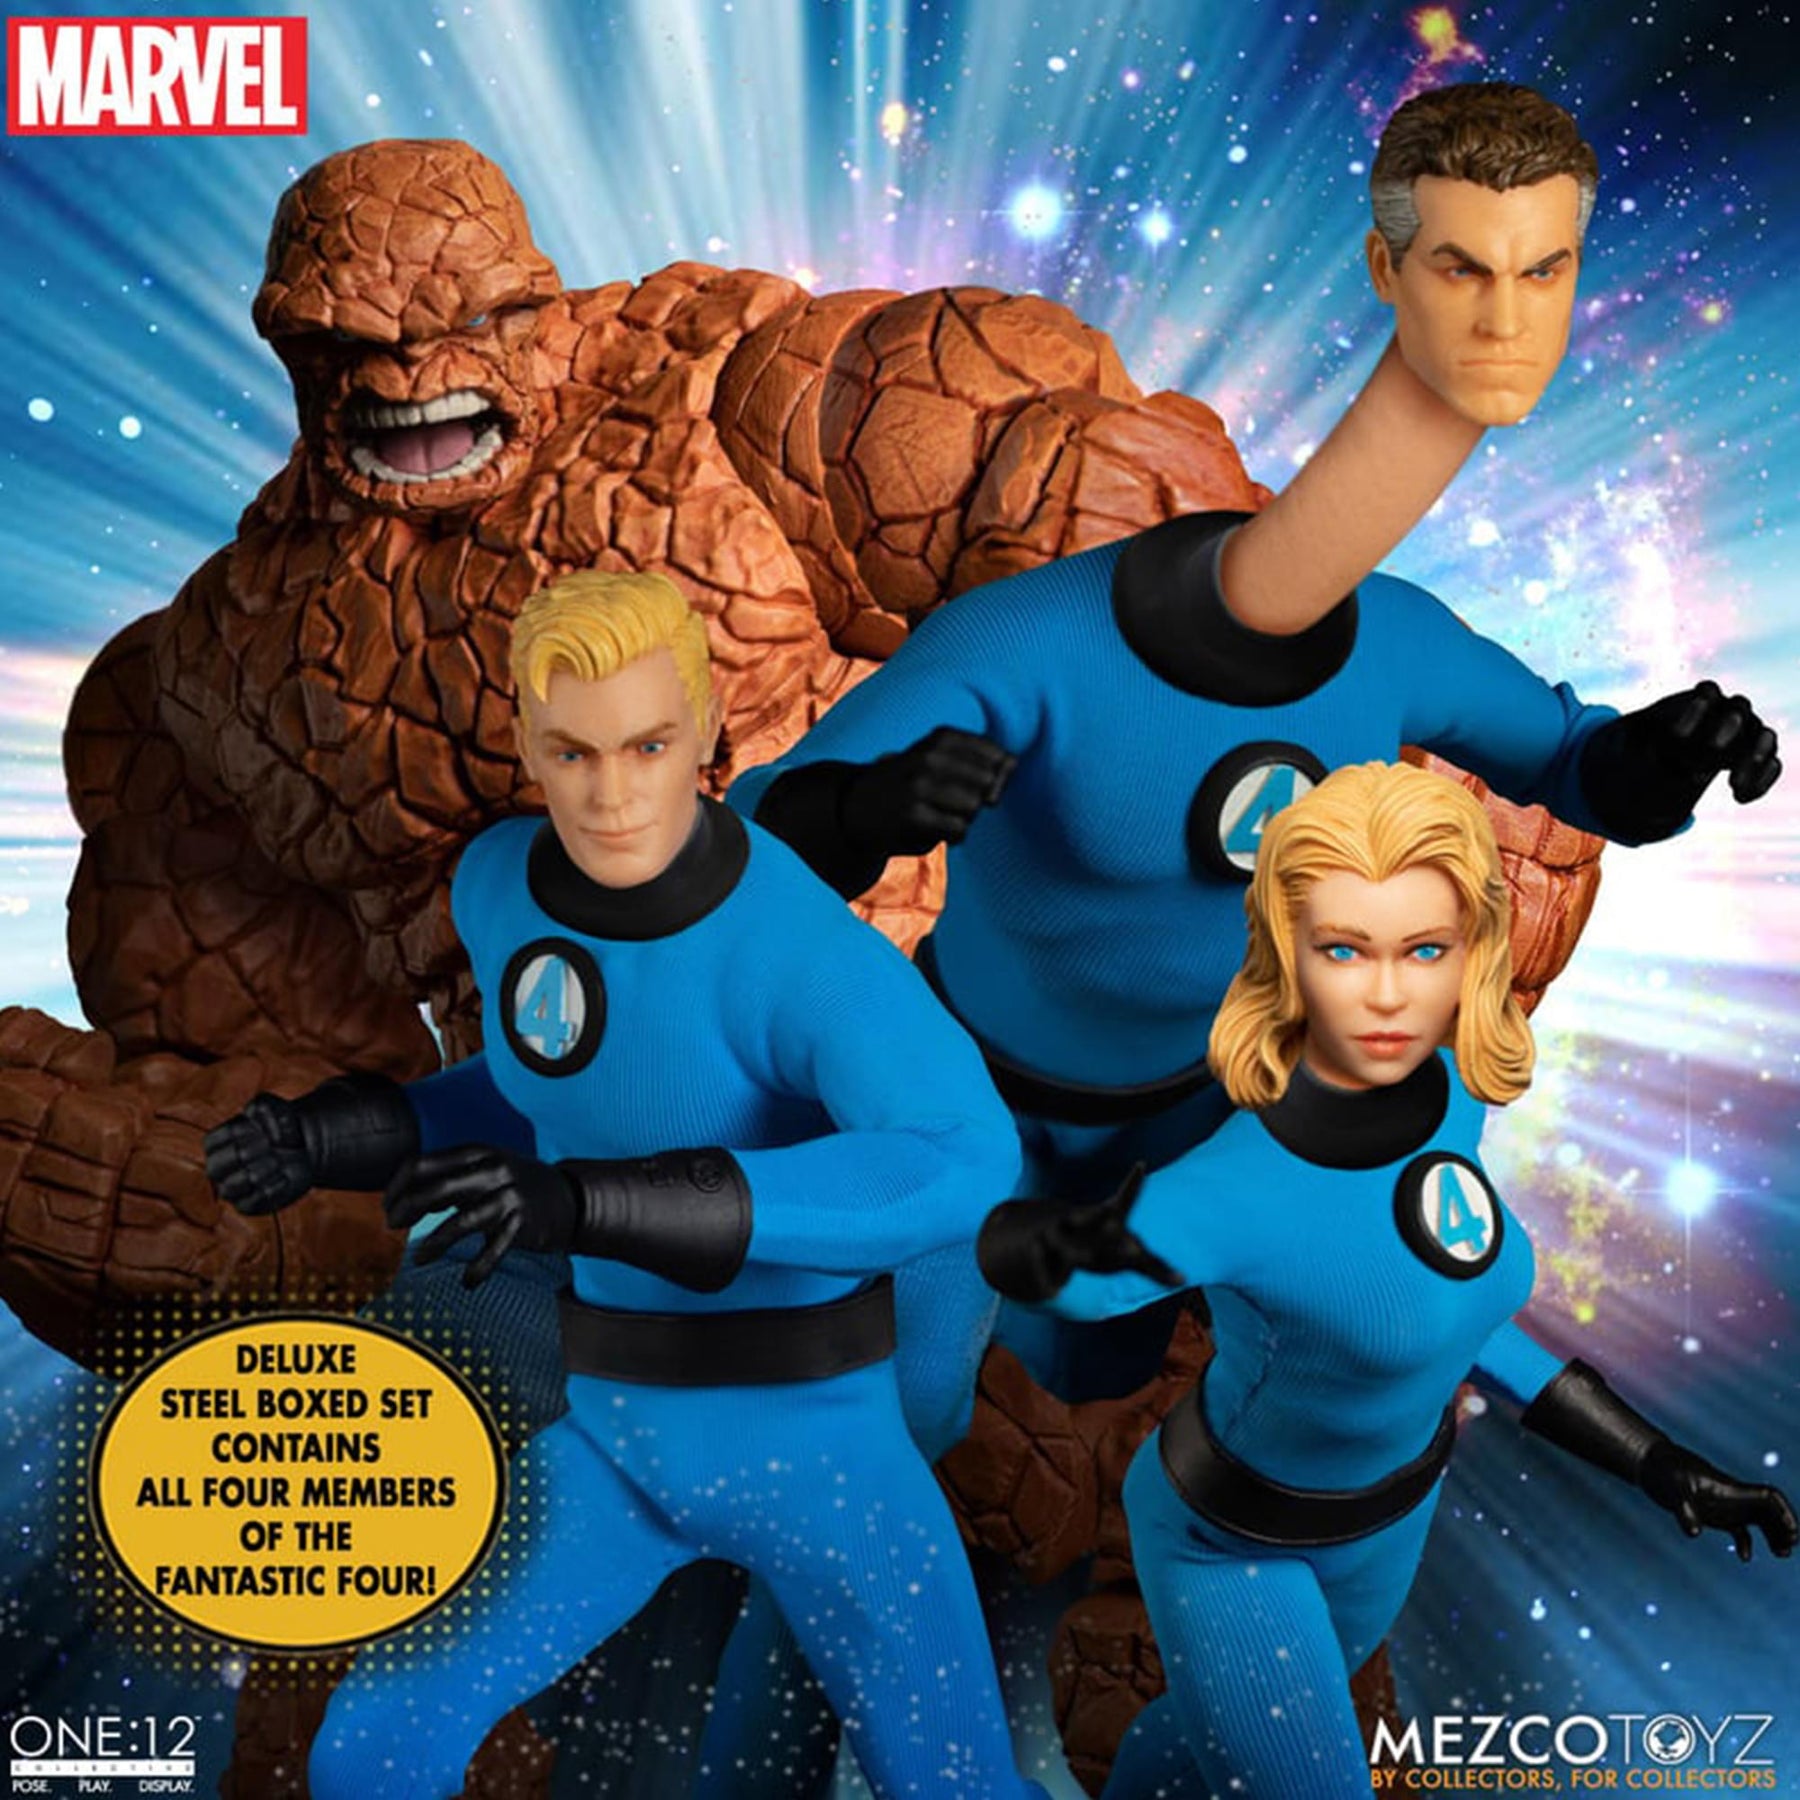 Marvel Fantastic Four Deluxe One:12 Collective Steel Boxed Set